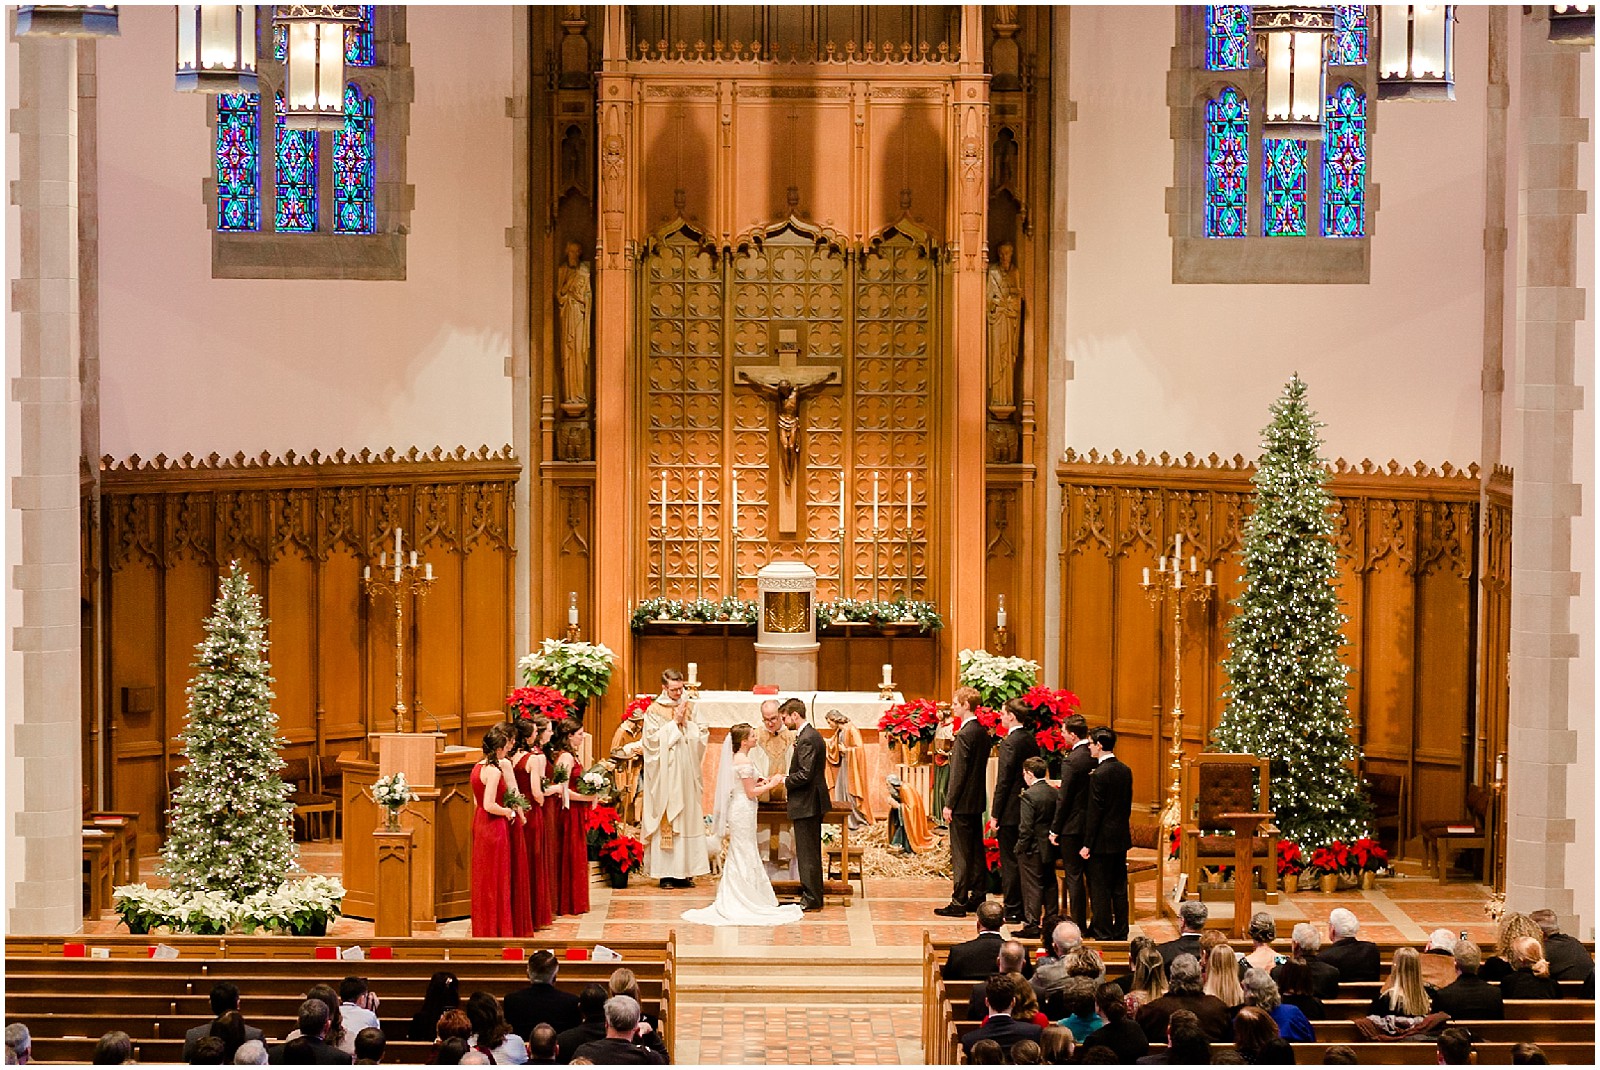 Bride and Groom saying vows - Nativity of Our Lord Catholic Church - Winter Wedding - Saint Paul, Minnesota